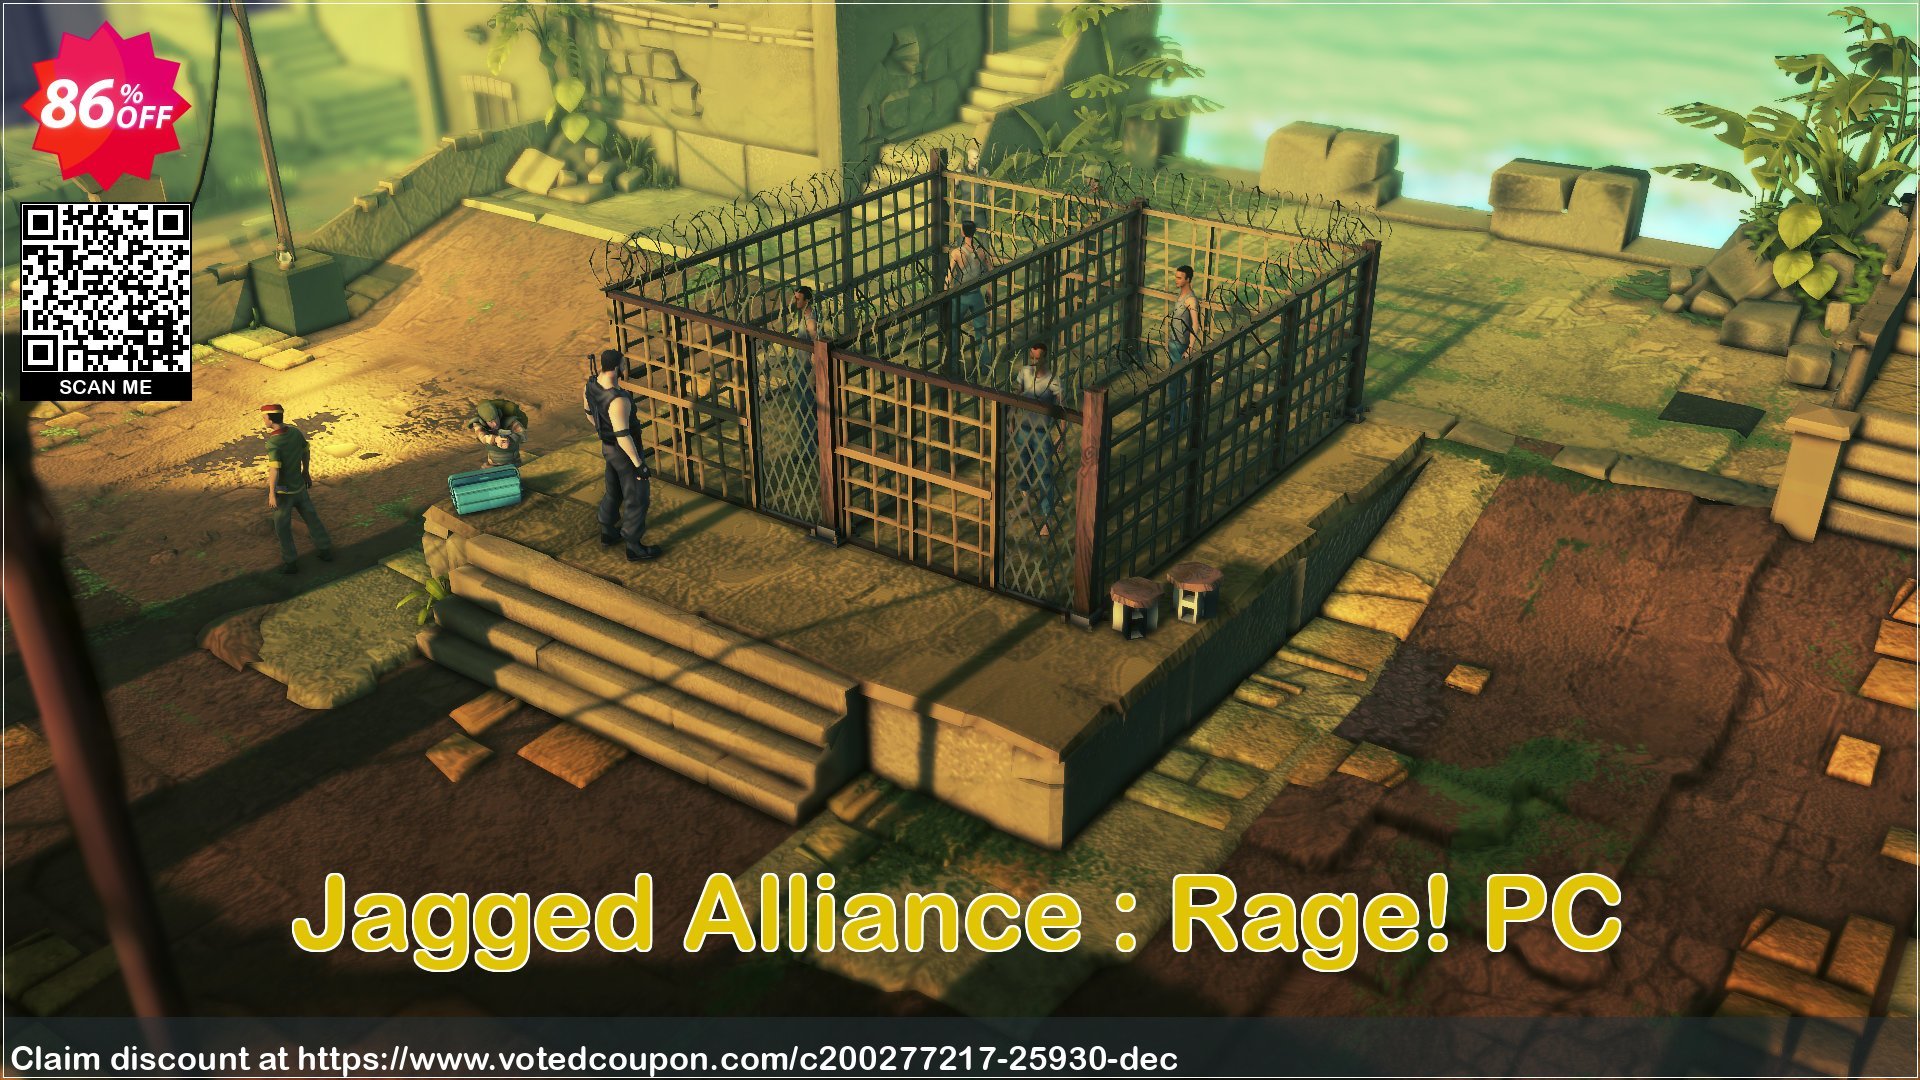 Jagged Alliance : Rage! PC Coupon Code Apr 2024, 86% OFF - VotedCoupon